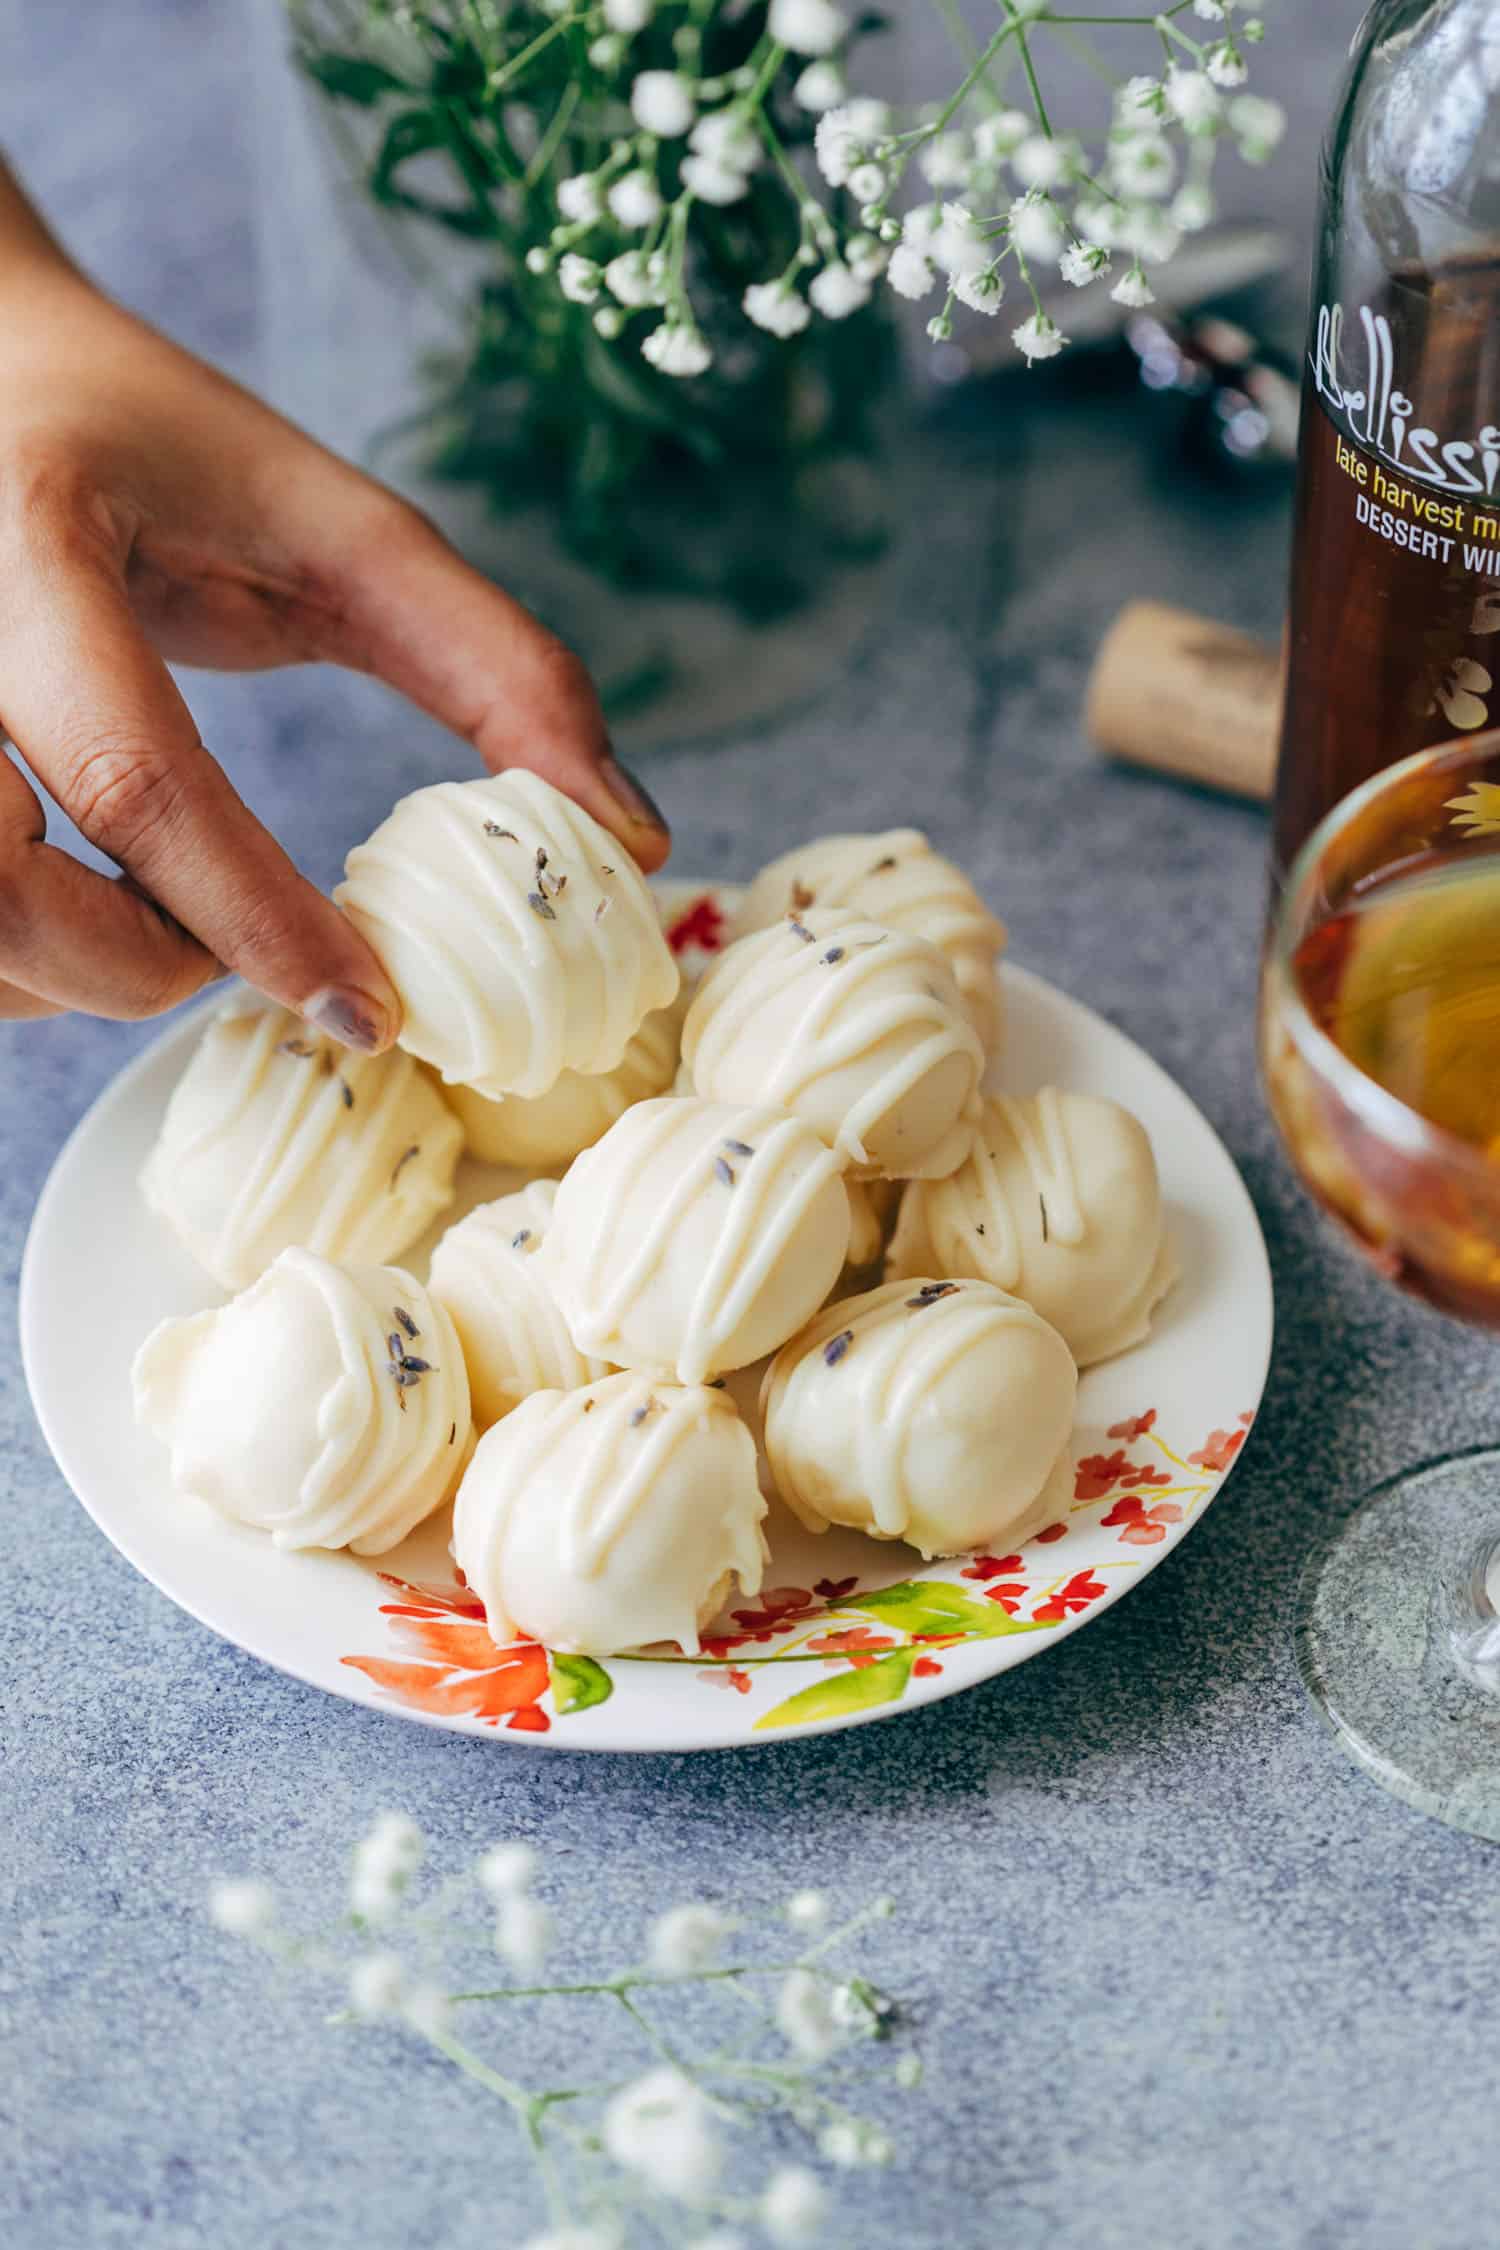 Lavender white chocolate truffles are fragrant, creamy white chocolate bites that are perfect for the festive season and holidays! Use them to serve as mini desserts, or for gifting. 